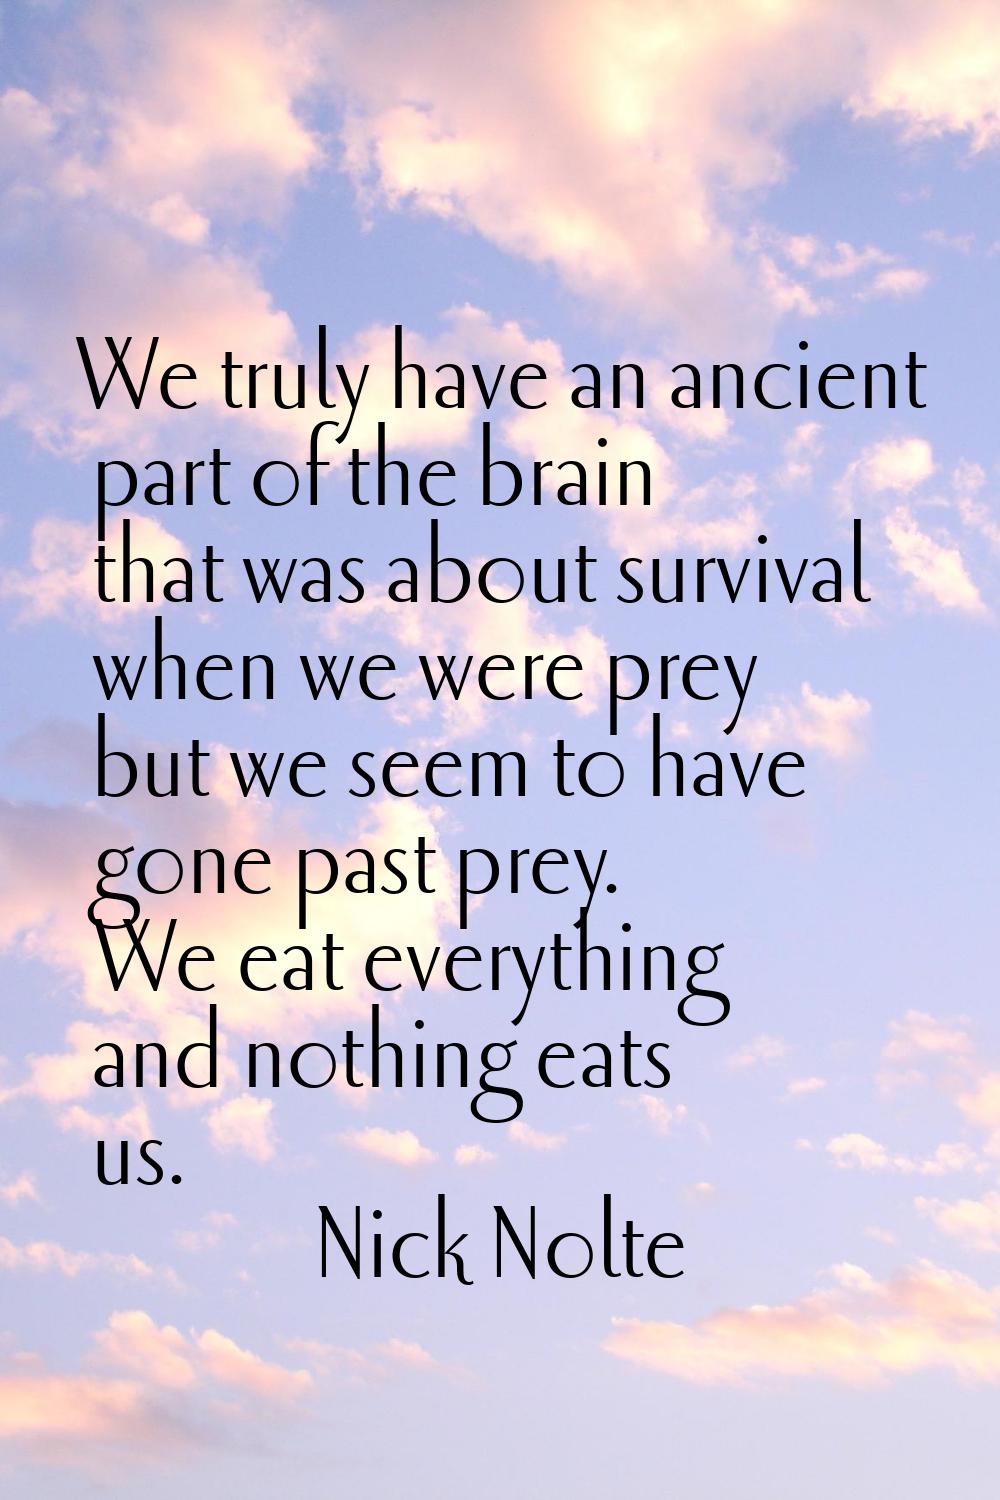 We truly have an ancient part of the brain that was about survival when we were prey but we seem to